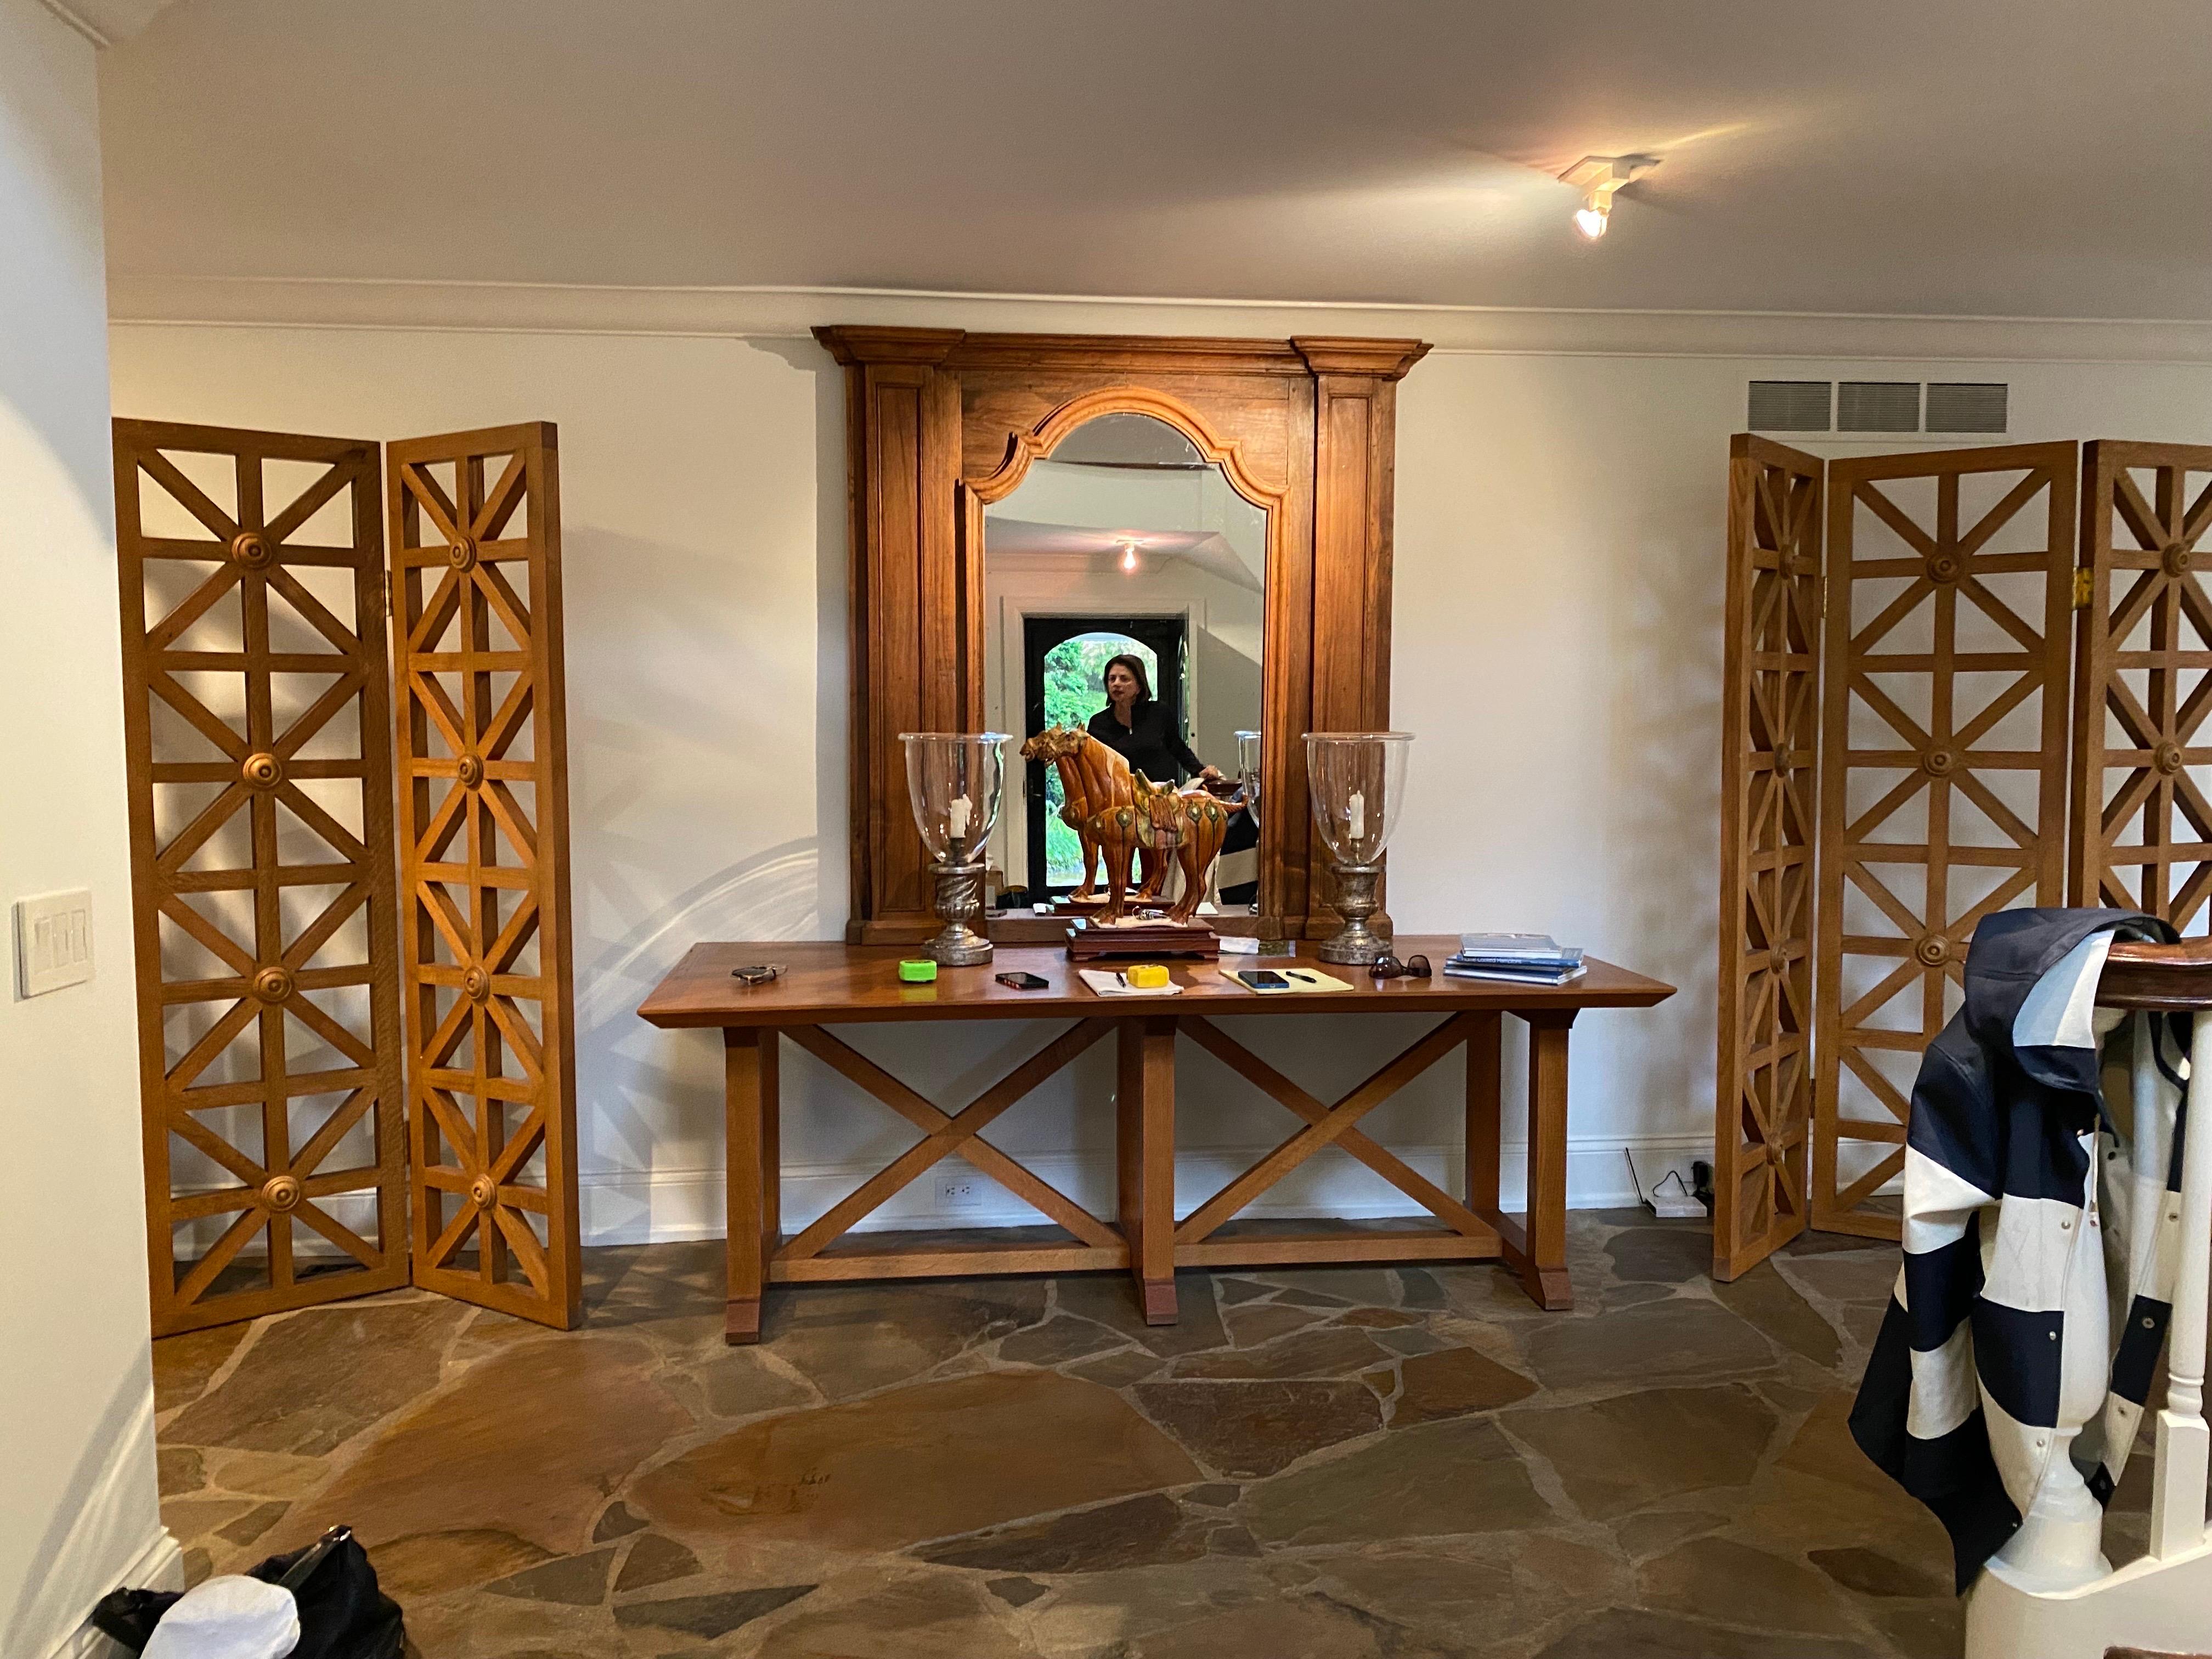 A show-stopping pair of Modern Architectural oak three panel folding screen/dividers. 
Open cut design with center medallion. Solid oak. In the light appears more of a warm honey finish and out of the light has an aged honey finish. Very good